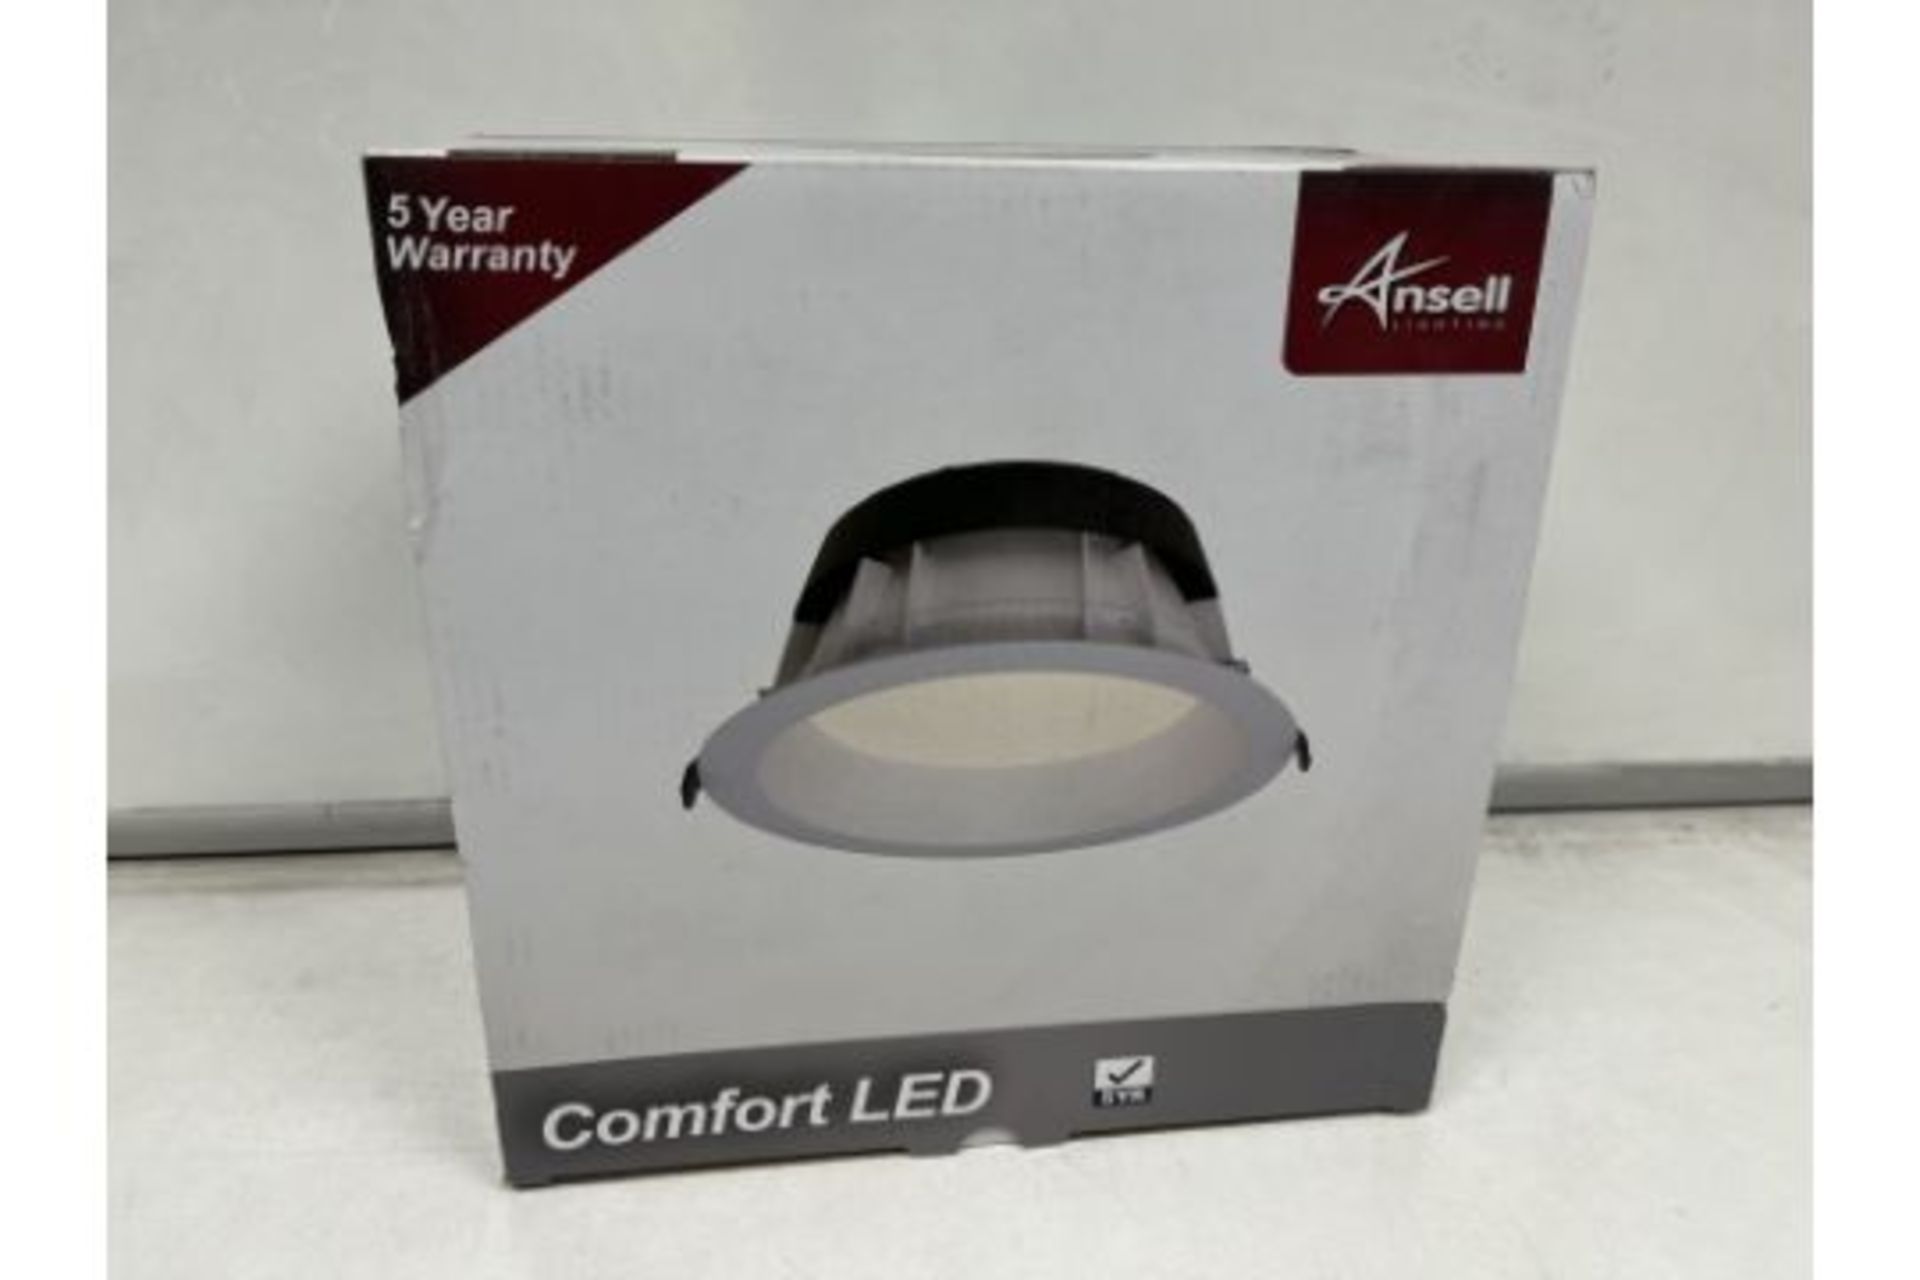 6 X NEW BOXED ANSELL COMFORT LED 13W 3000K LED DOWNLIGHTS - WHITE. ROW 16 RACK